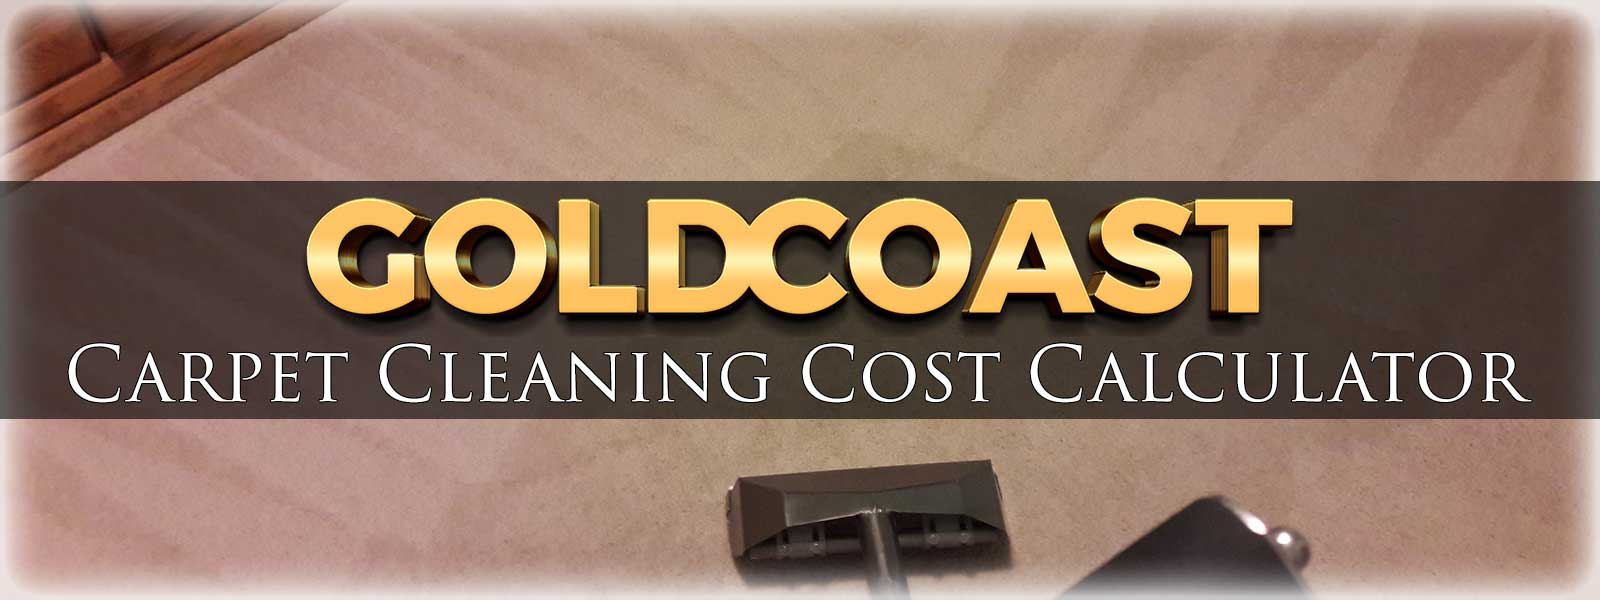 carpet cleaning cost calculator flooring coast prices much does per